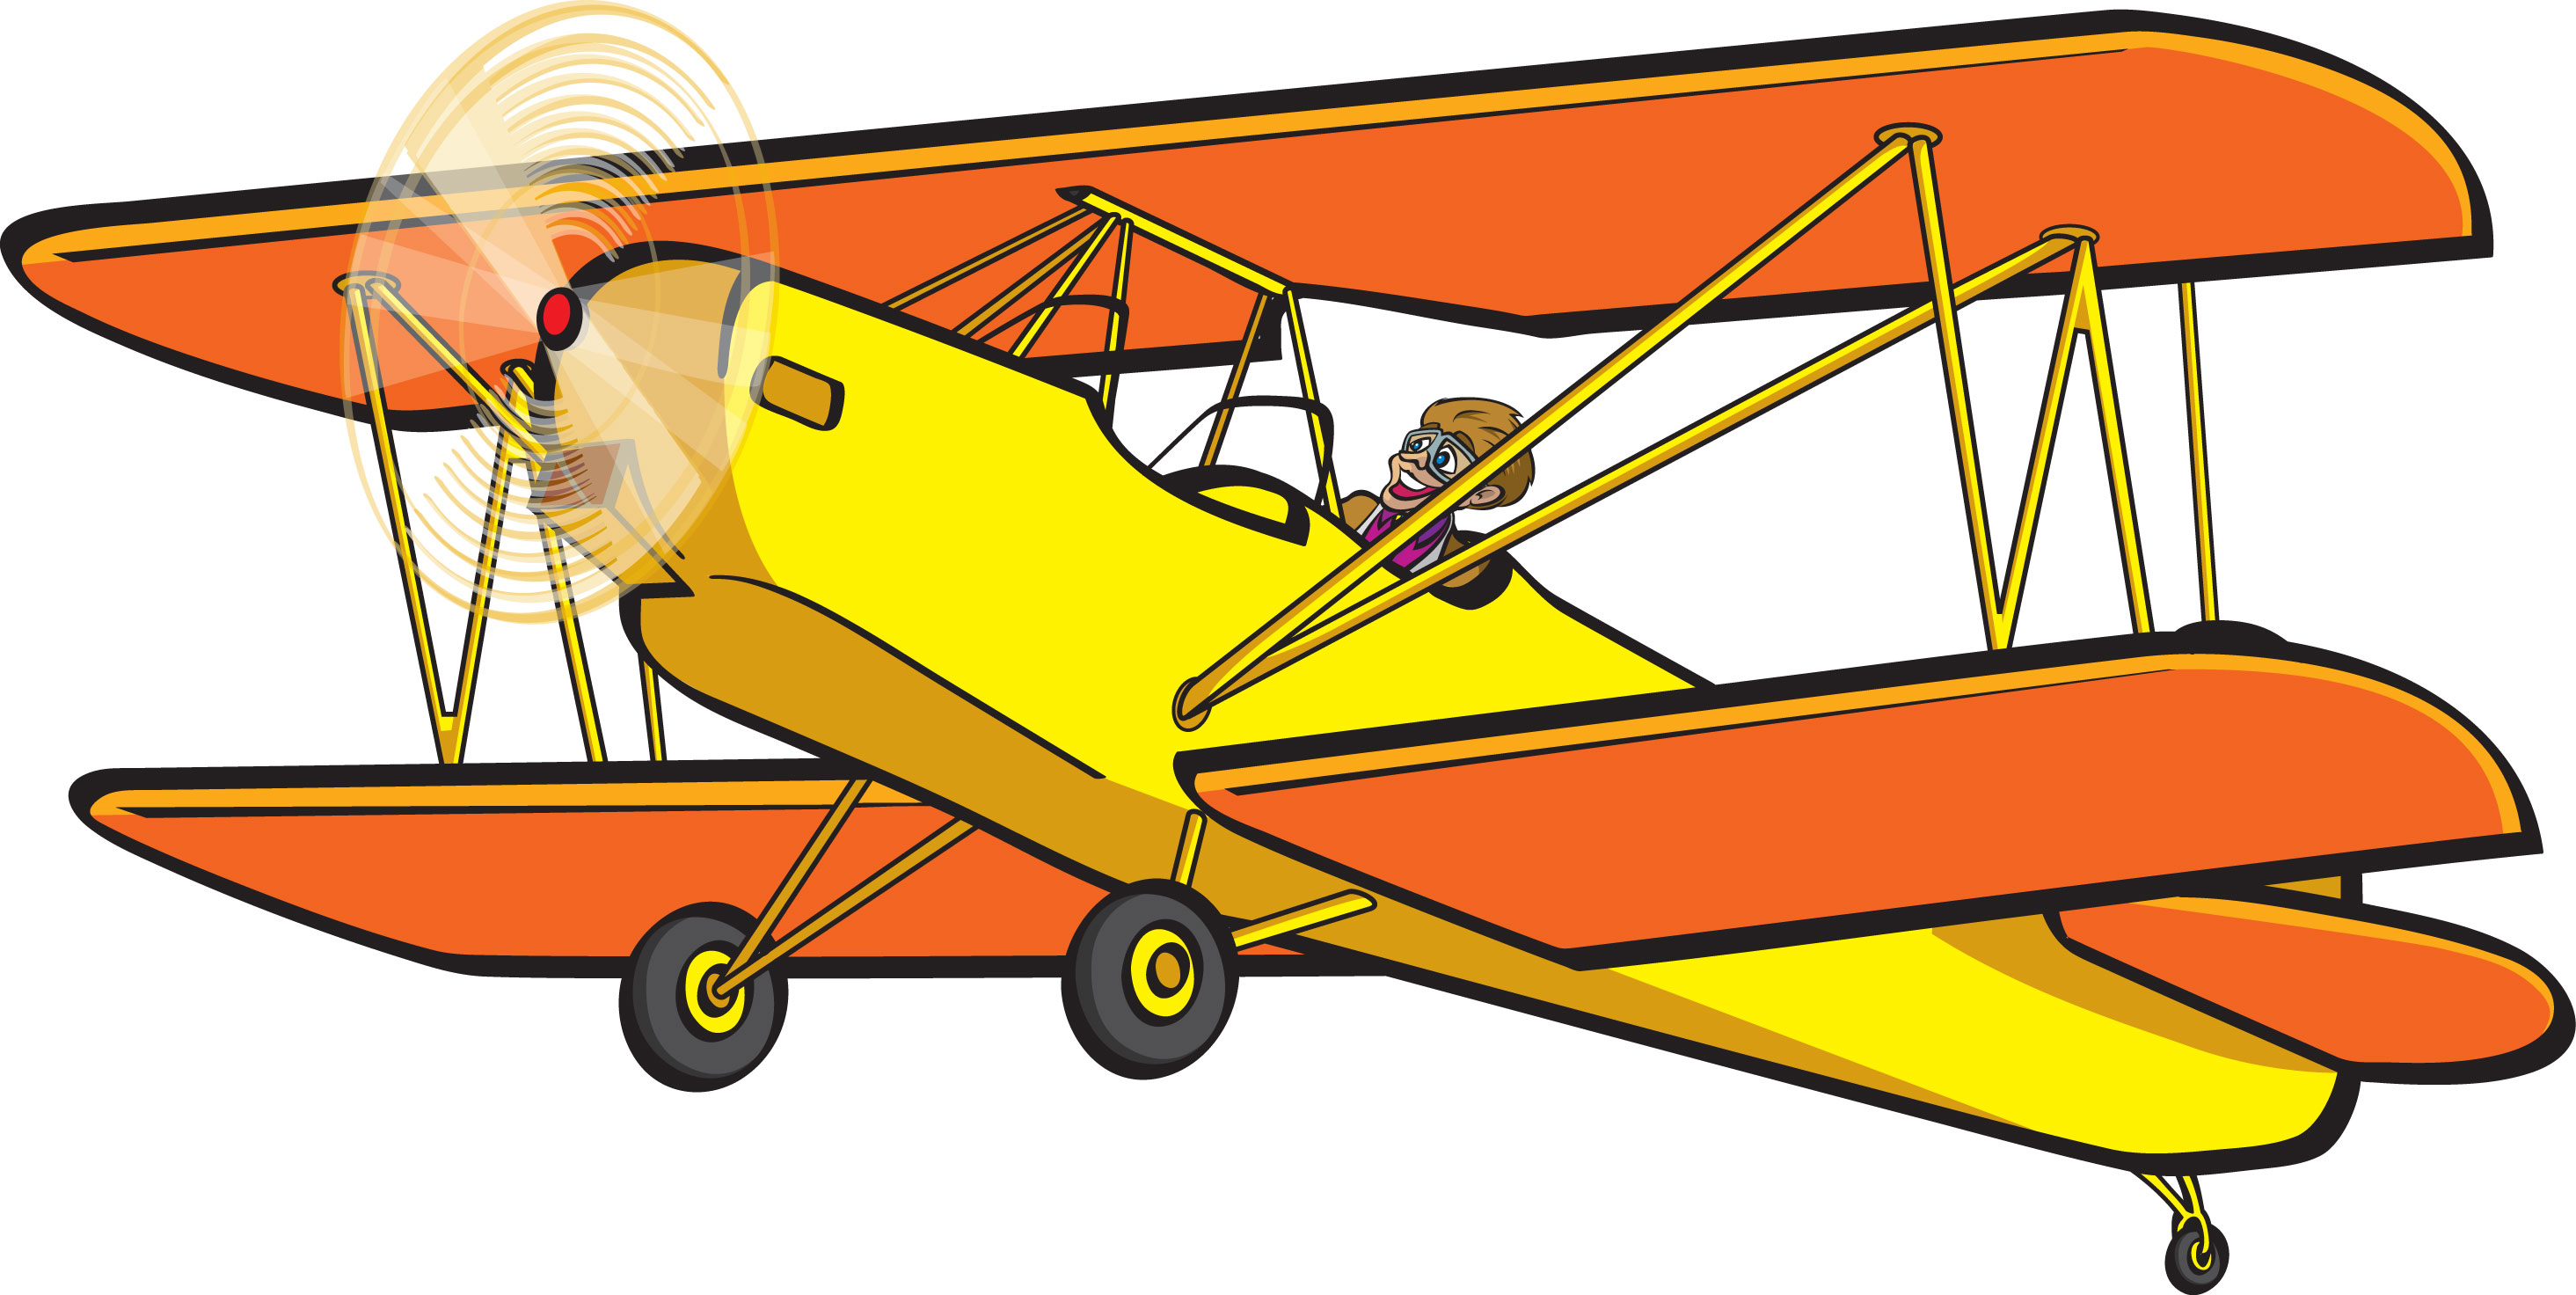 Biplane clipart old fashioned. Free airplane cliparts download